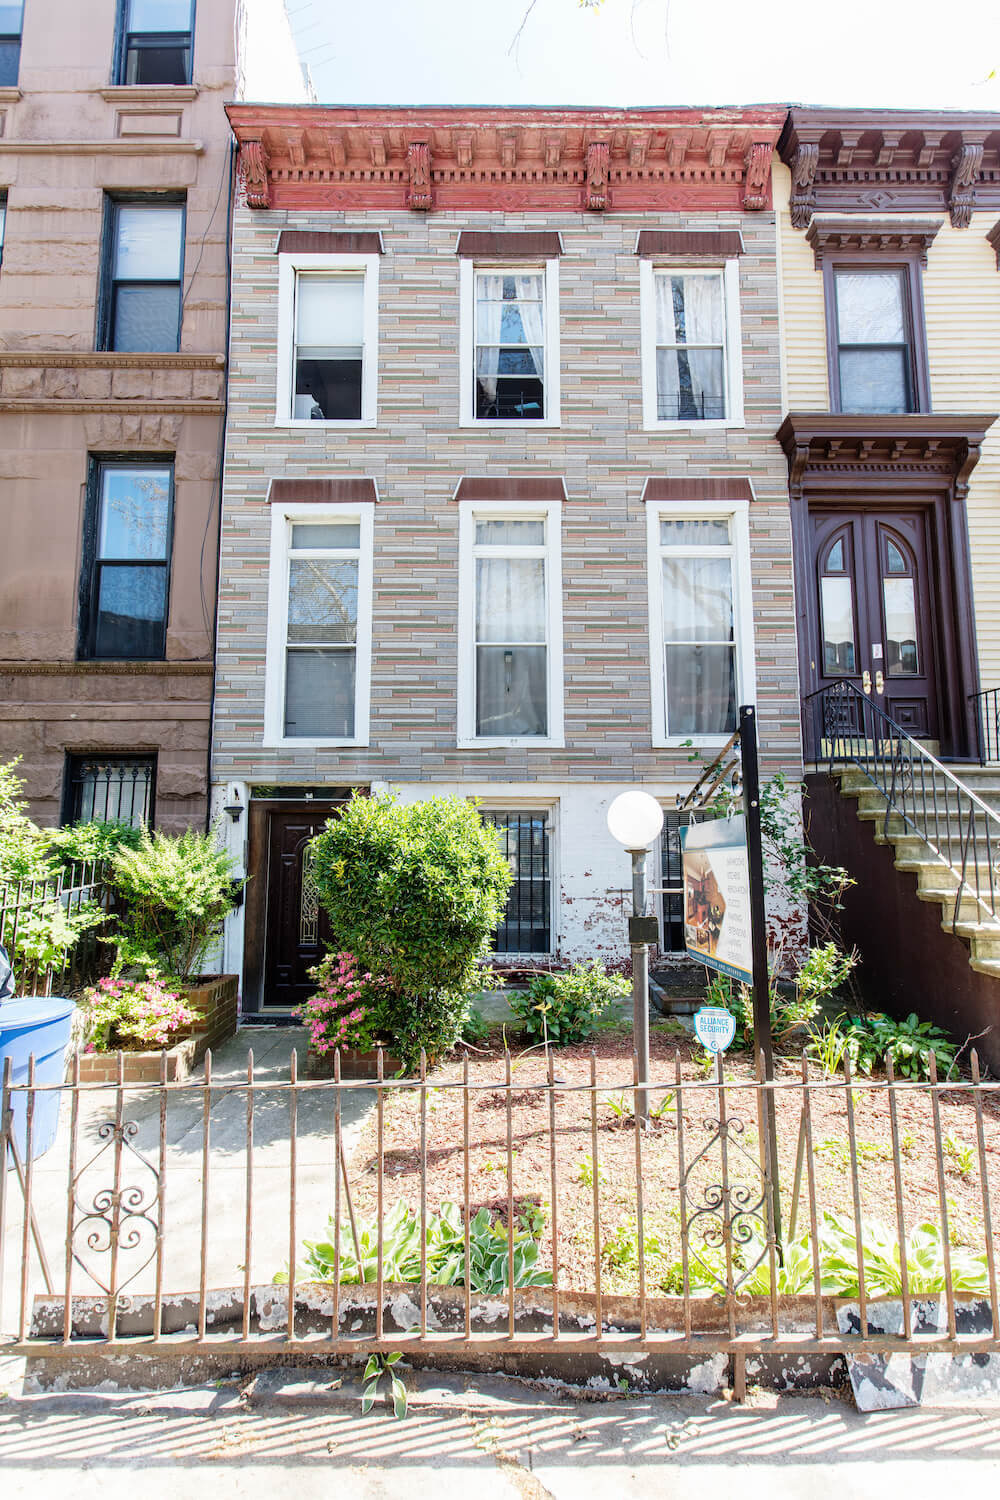 Exterior of the Bed-Stuy home with front yard and metal gate